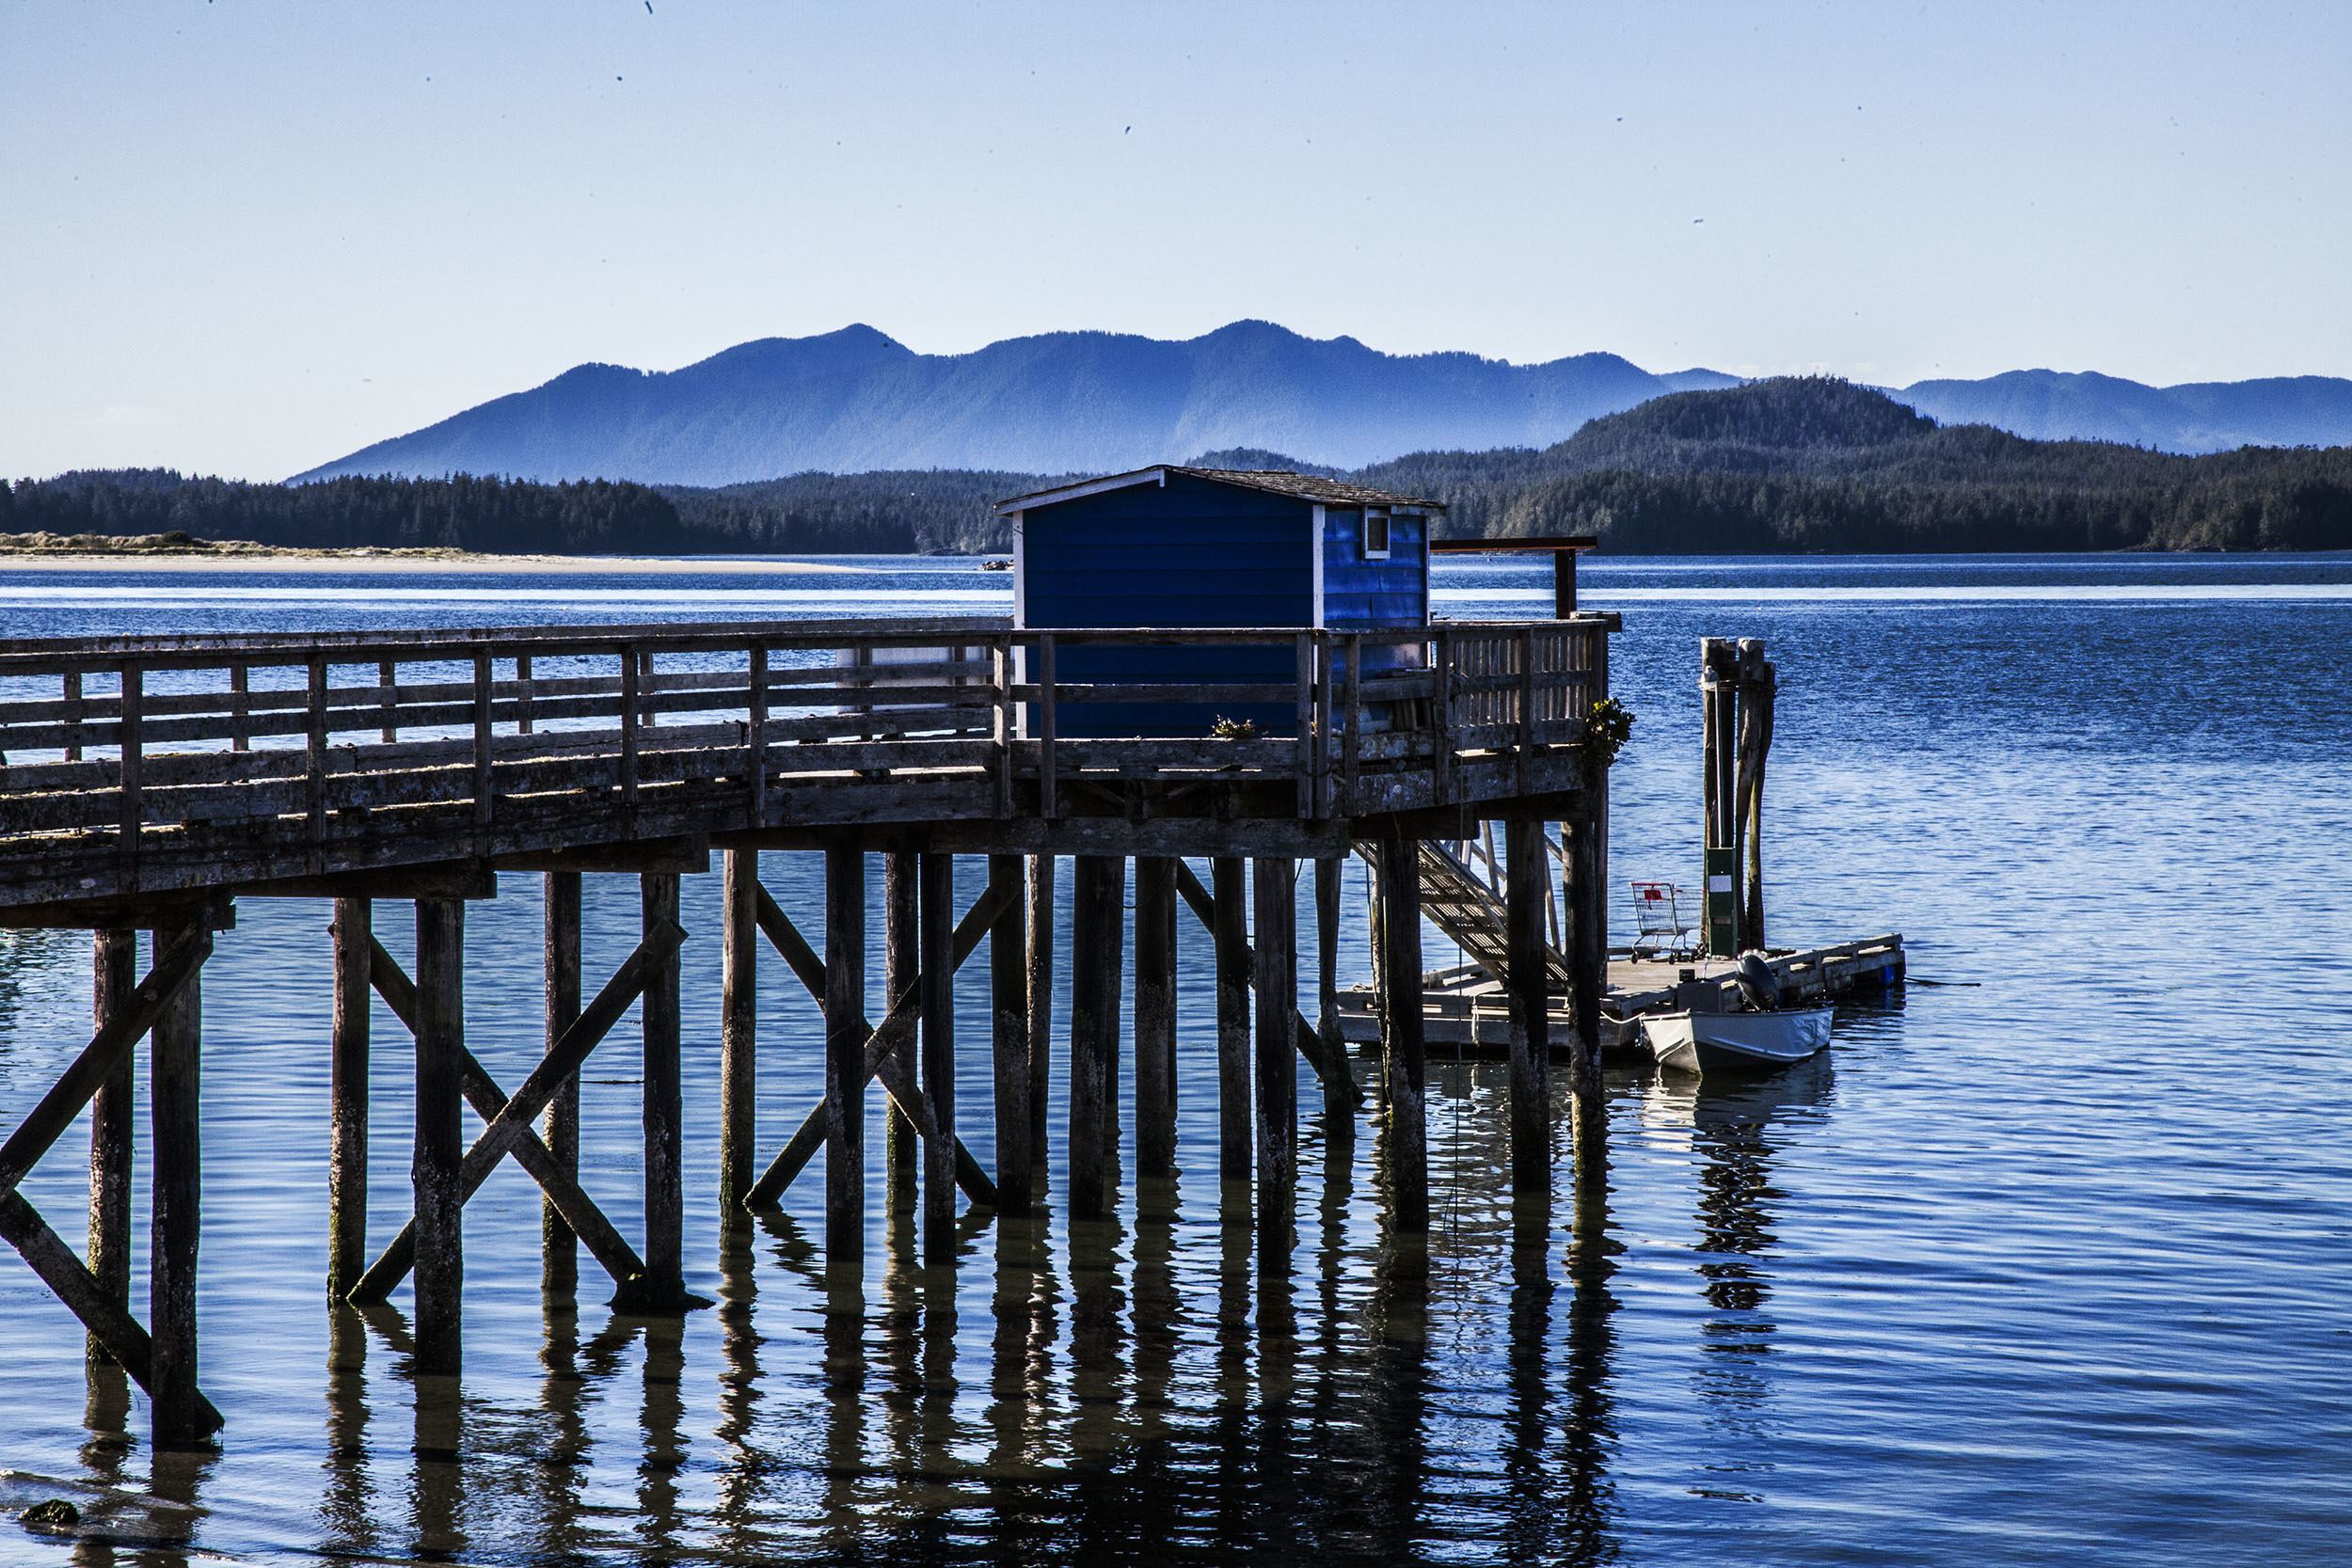 Jetty and cabin in the water in Tofino Vancouver Island Canada